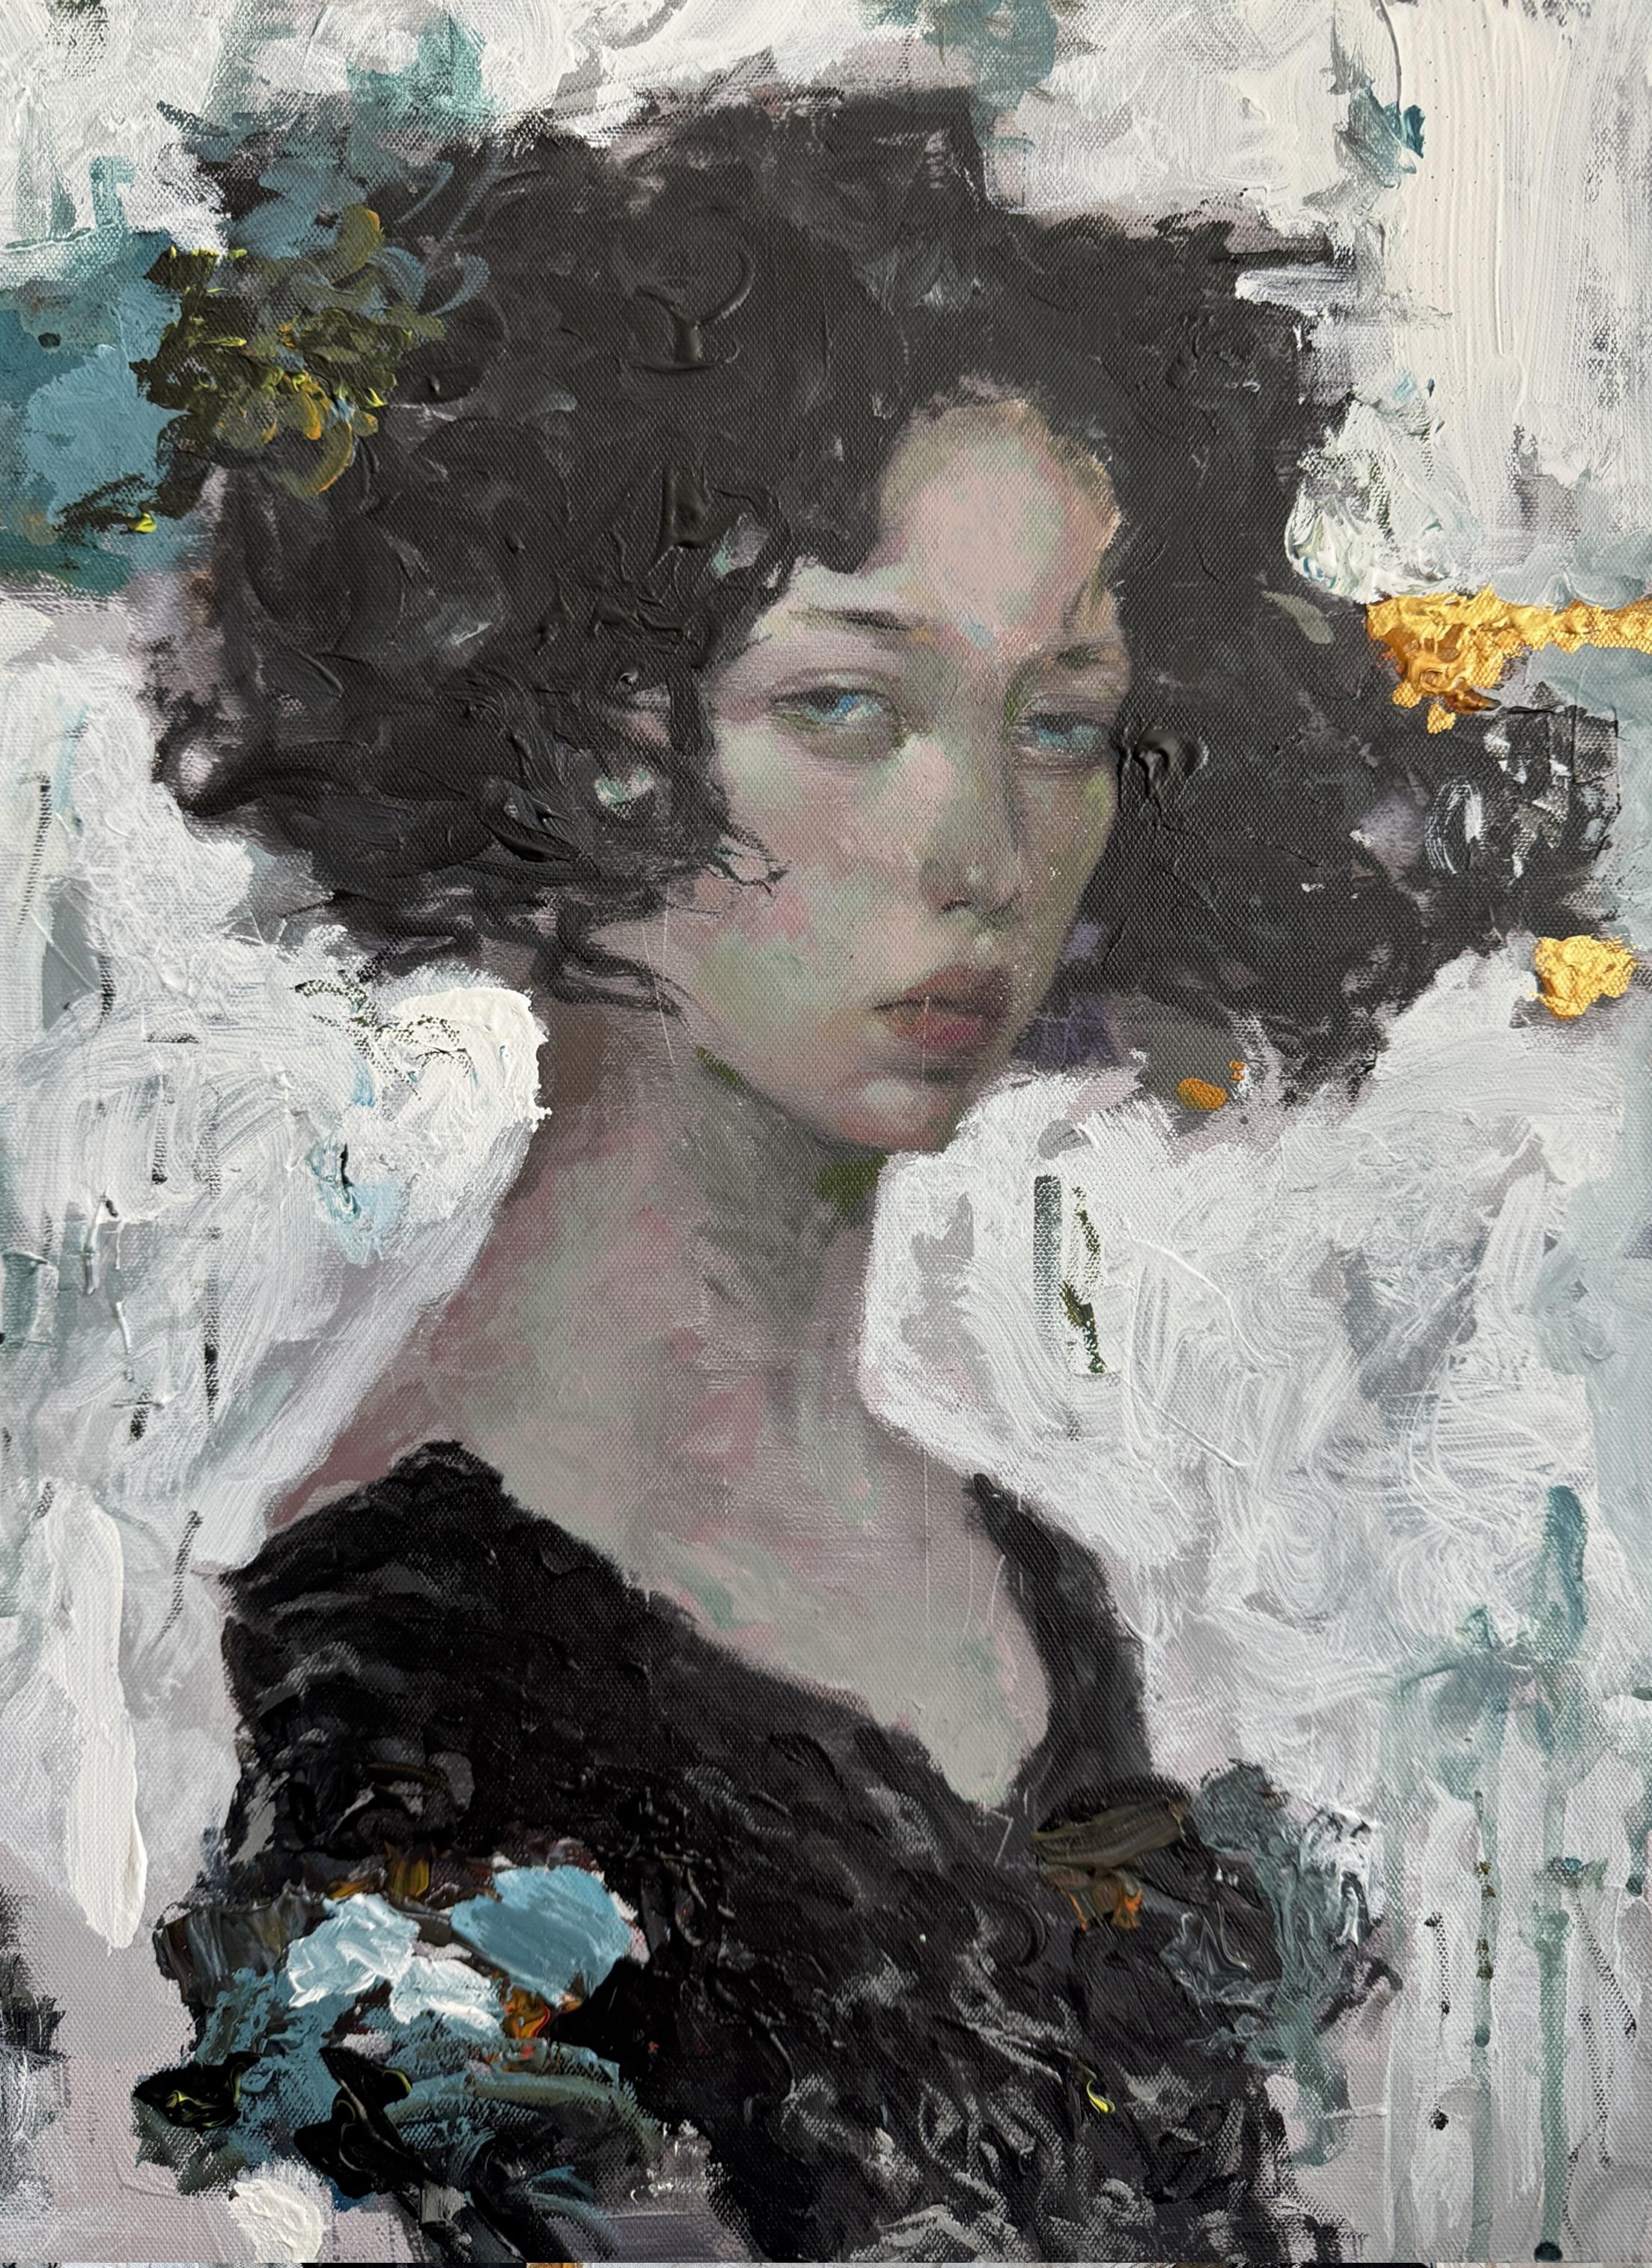 "Soyva" Painting 20" x 16" inch by Vladislav Chenchik

Vladislav Chenchik is a contemporary artist from Ukraine. His artwork combines abstract and realistic styles, with a focus on portraying girls and conveying their emotions through form. Each